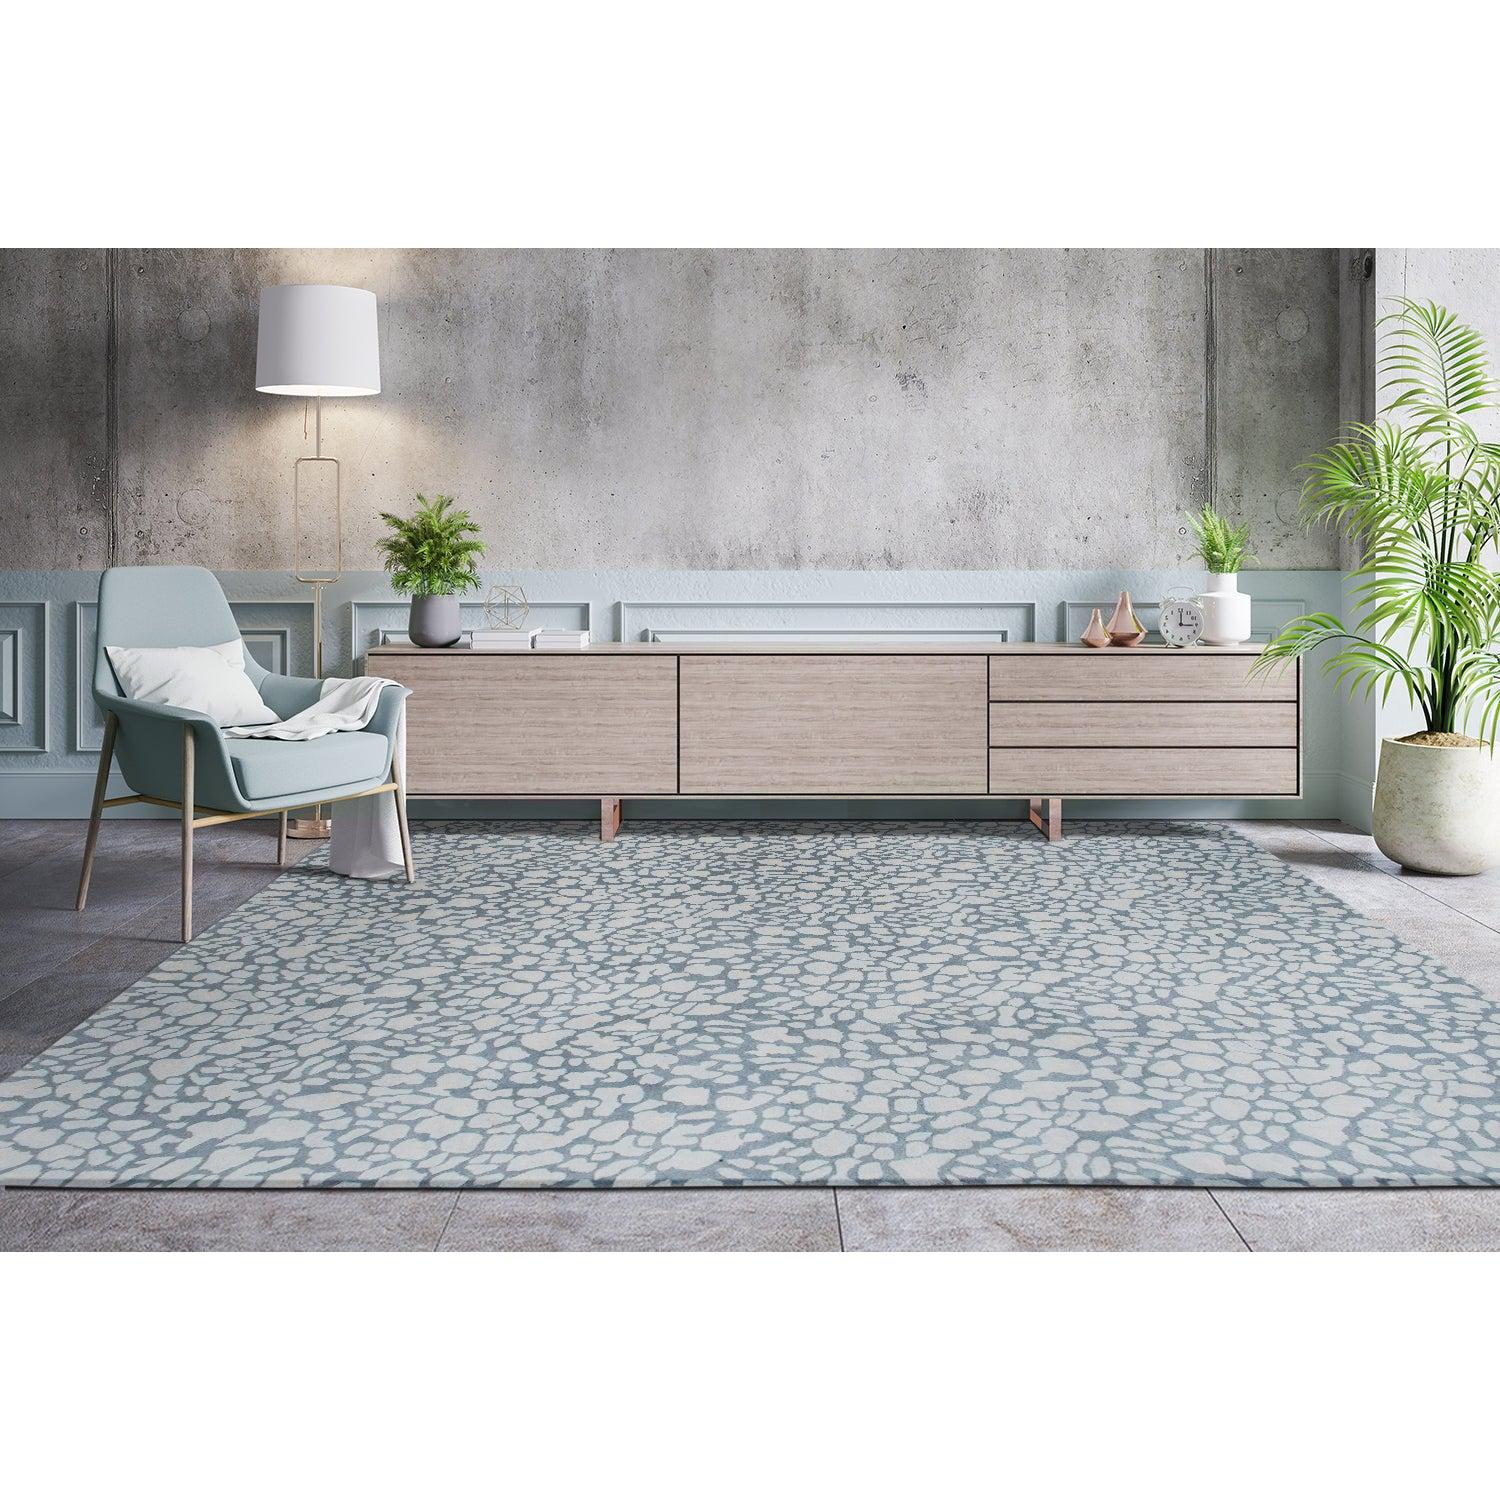 Rugs by Roo | Organic Weave Stained Glass Multi Wool Handtufted Rug-OW-STAMUL-0508